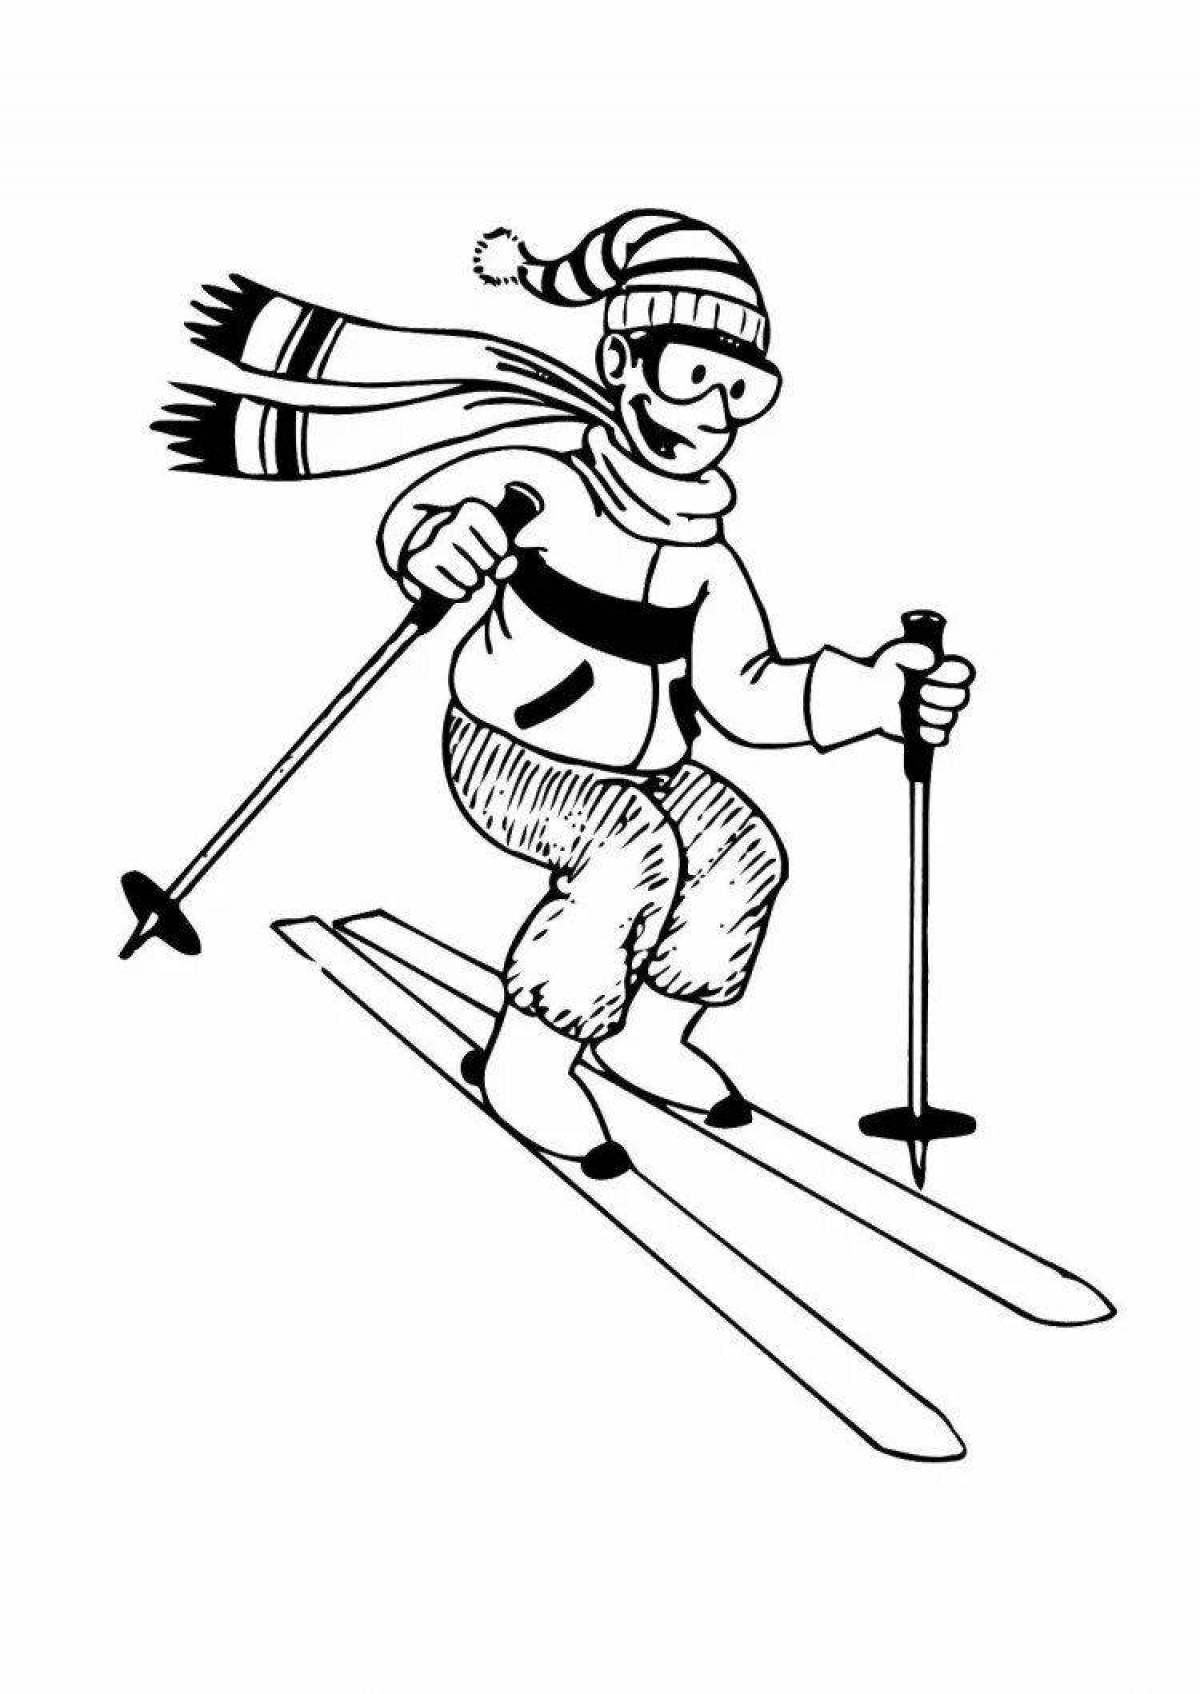 Coloring book excited baby skier